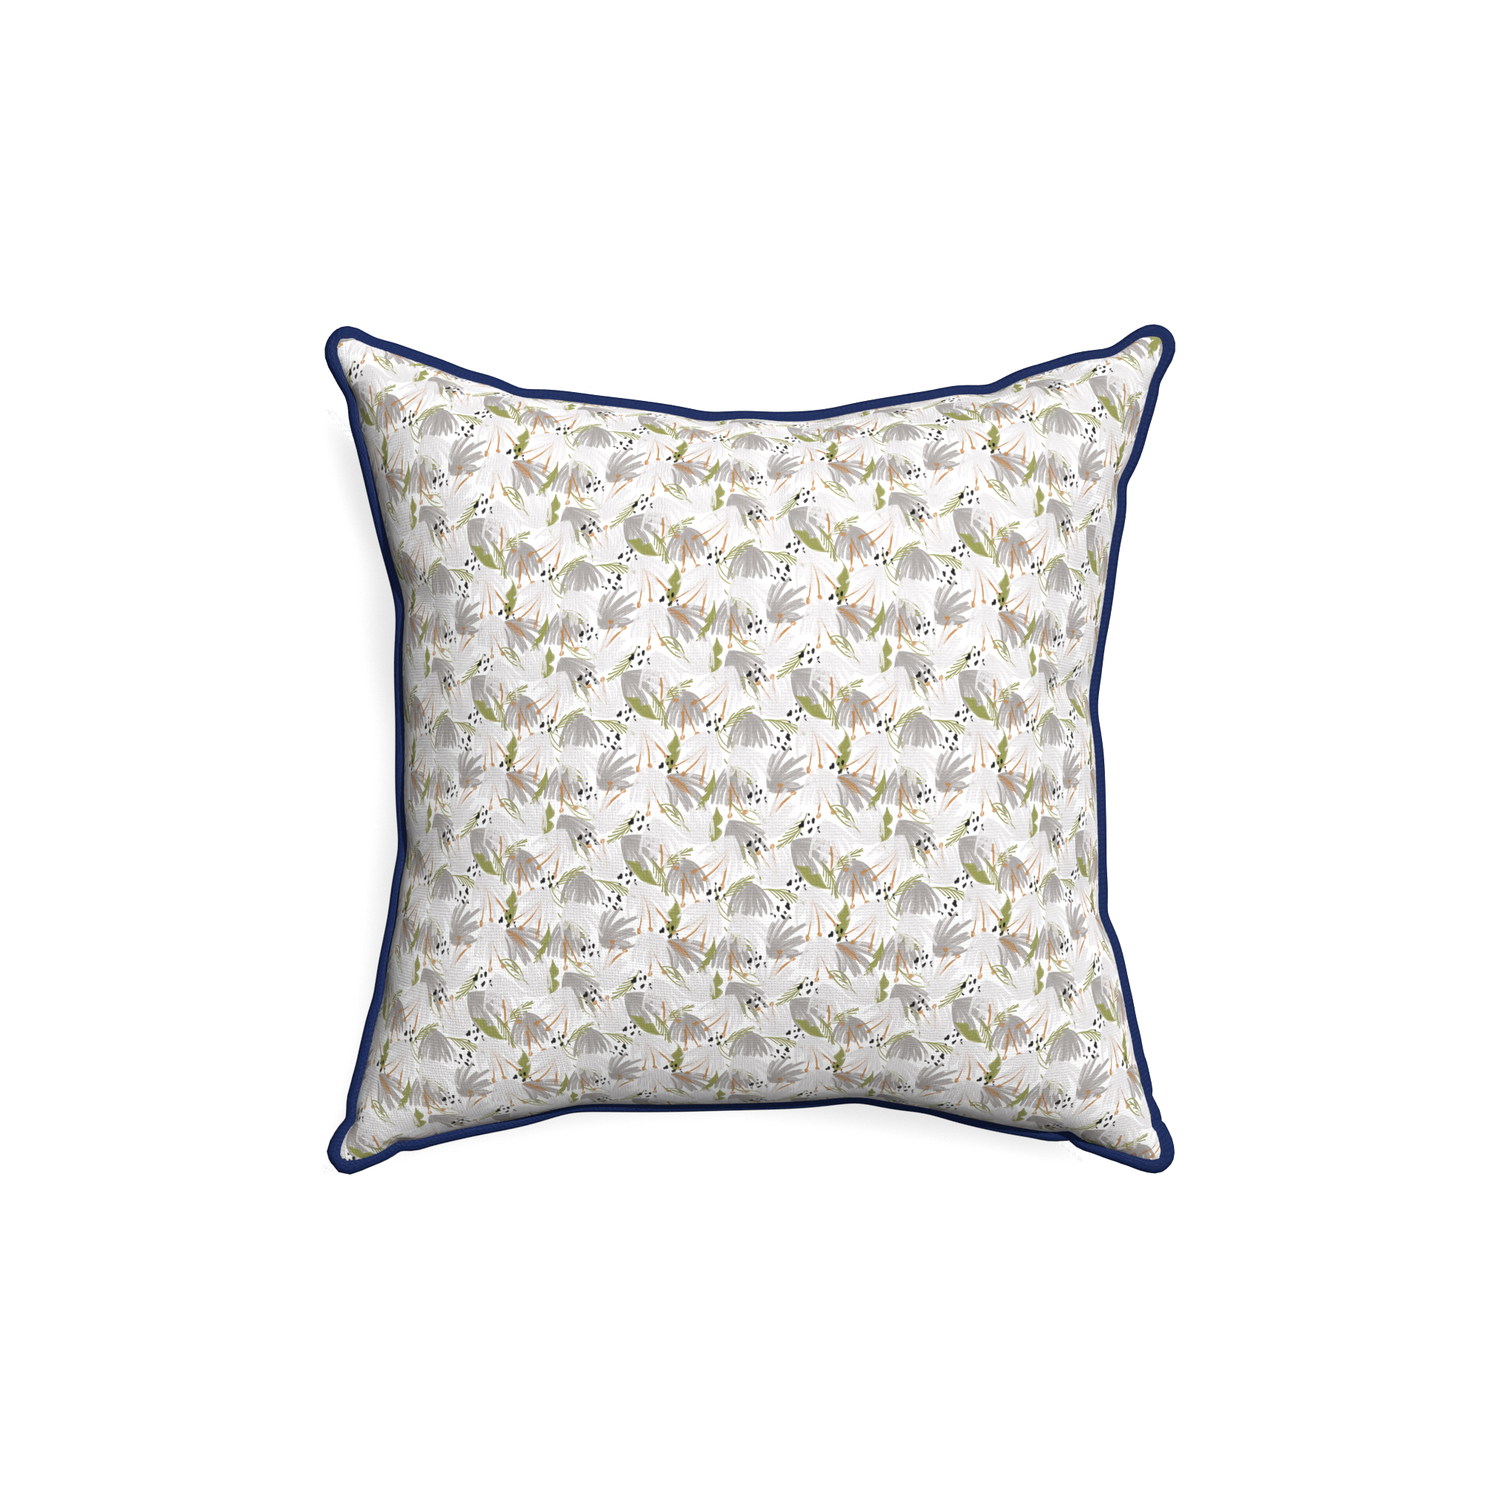 18-square eden grey custom pillow with midnight piping on white background